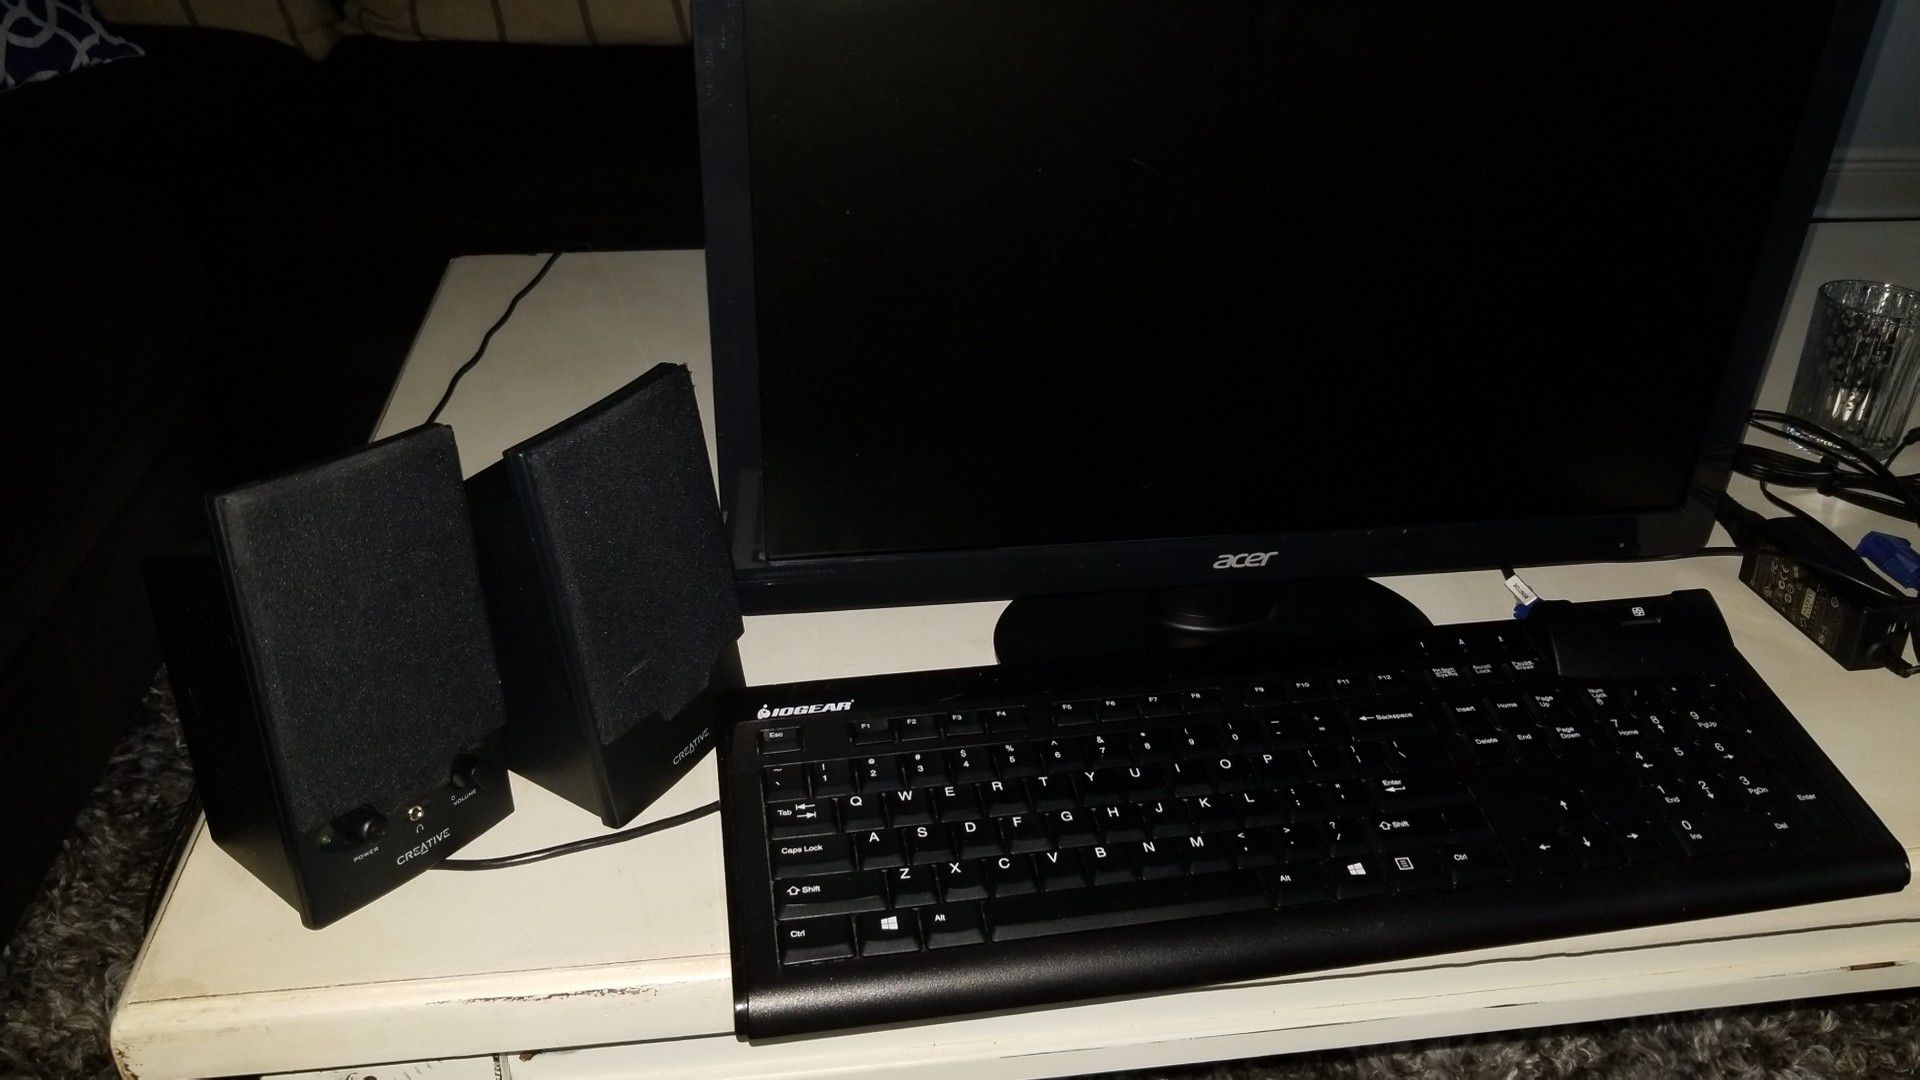 18" computer monitor, speakers, and keyboard